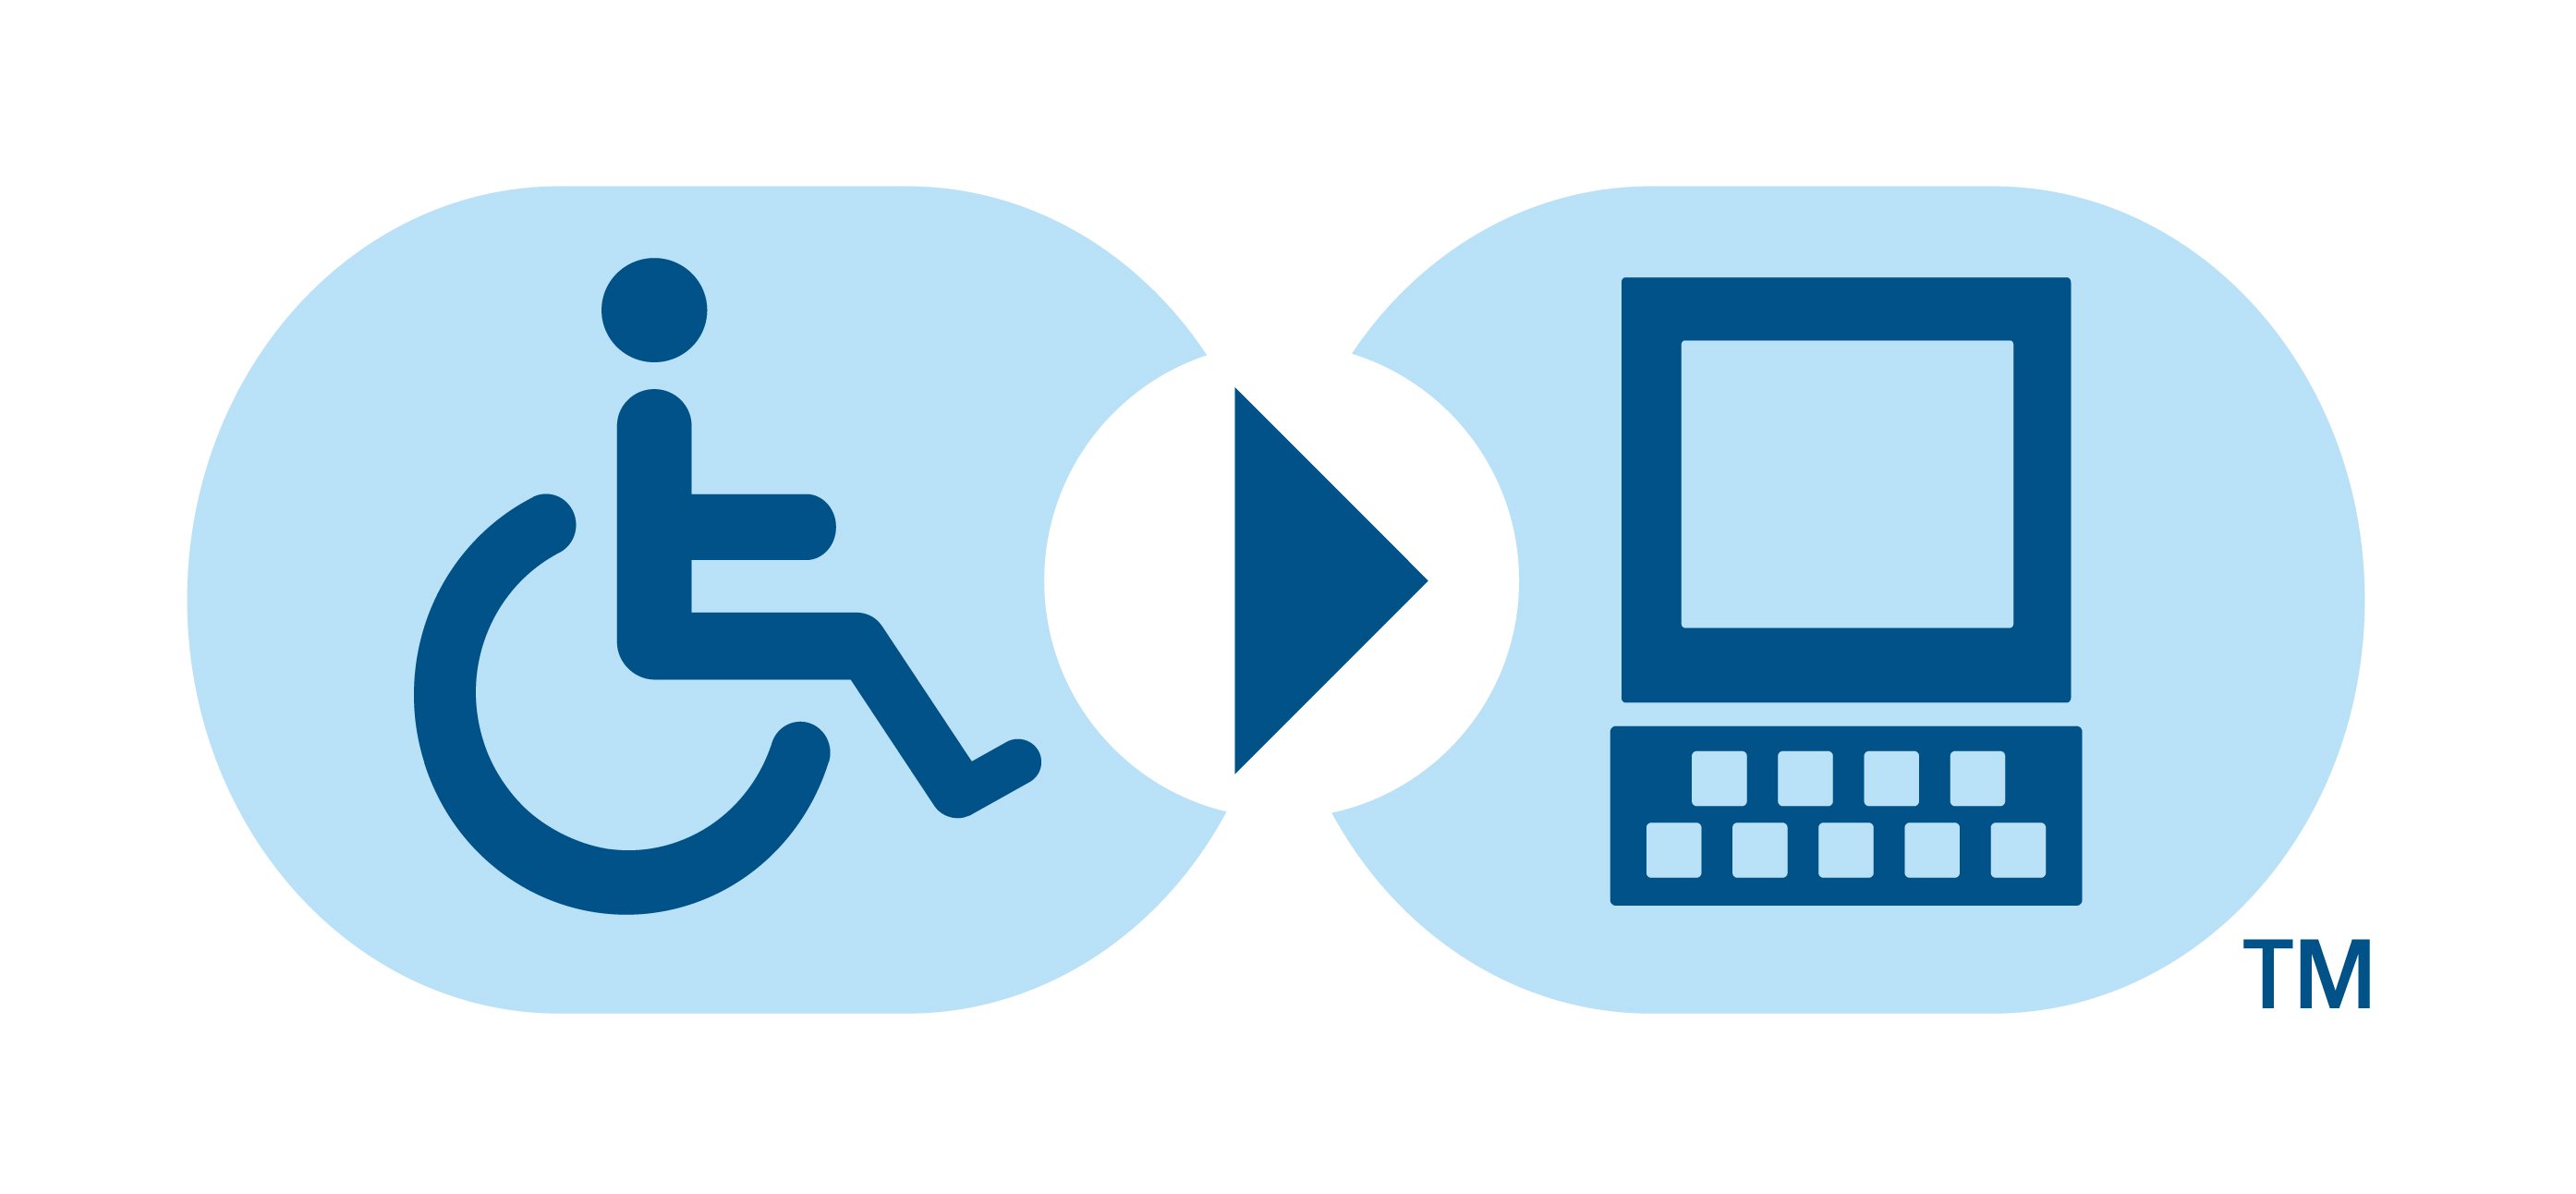 Additional support. Web accessibility. Accessible website. Web accessibility icon. Иконка ассистив.